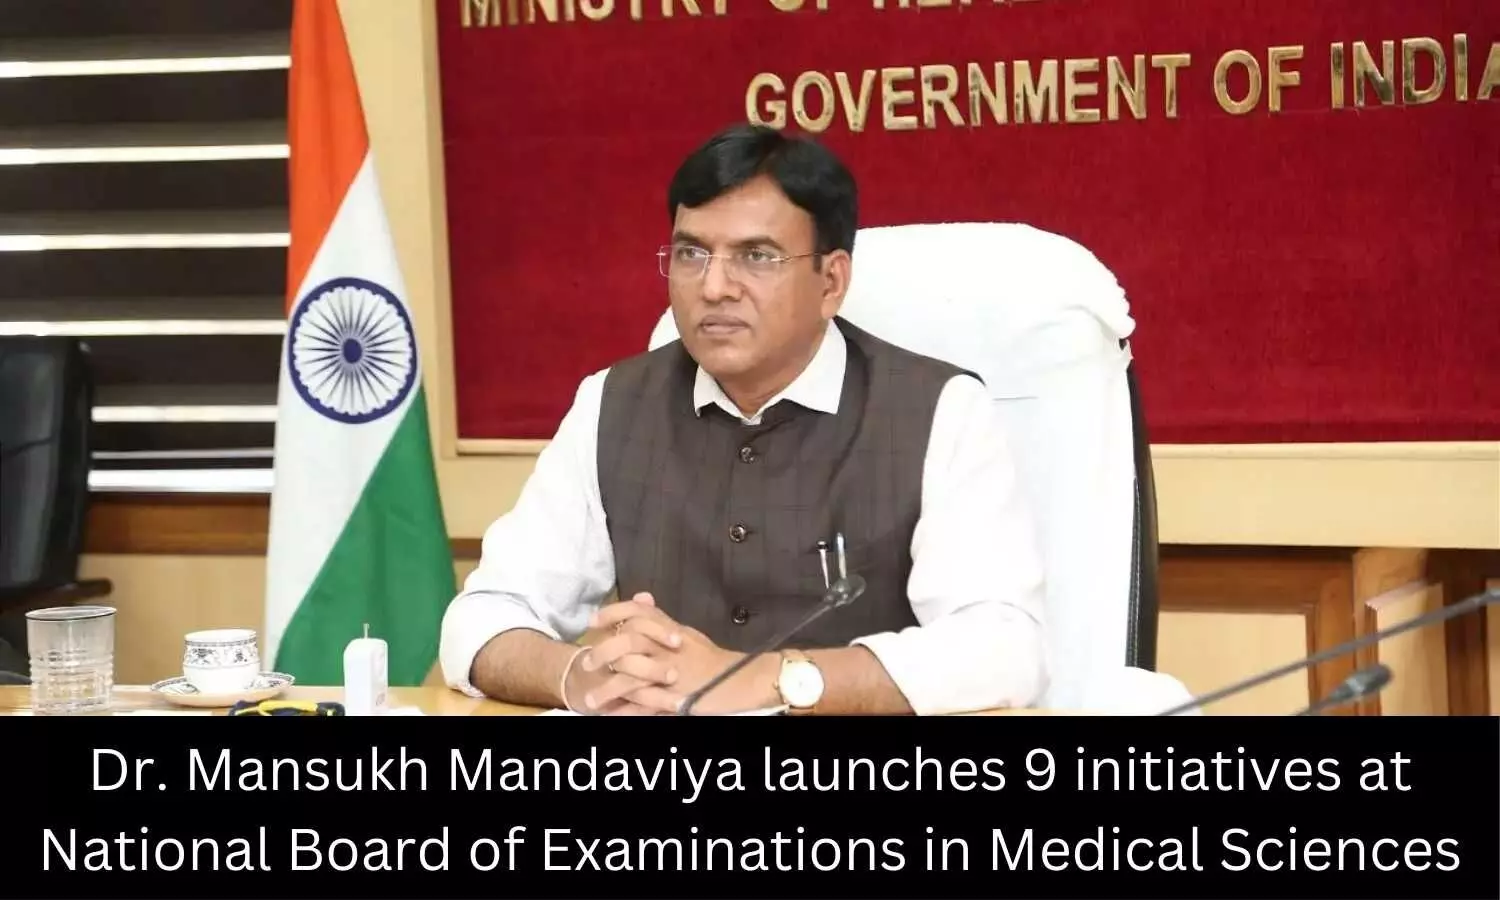 Union Health Minister unveils 9 initiatives at National Board of Examinations in Medical Sciences